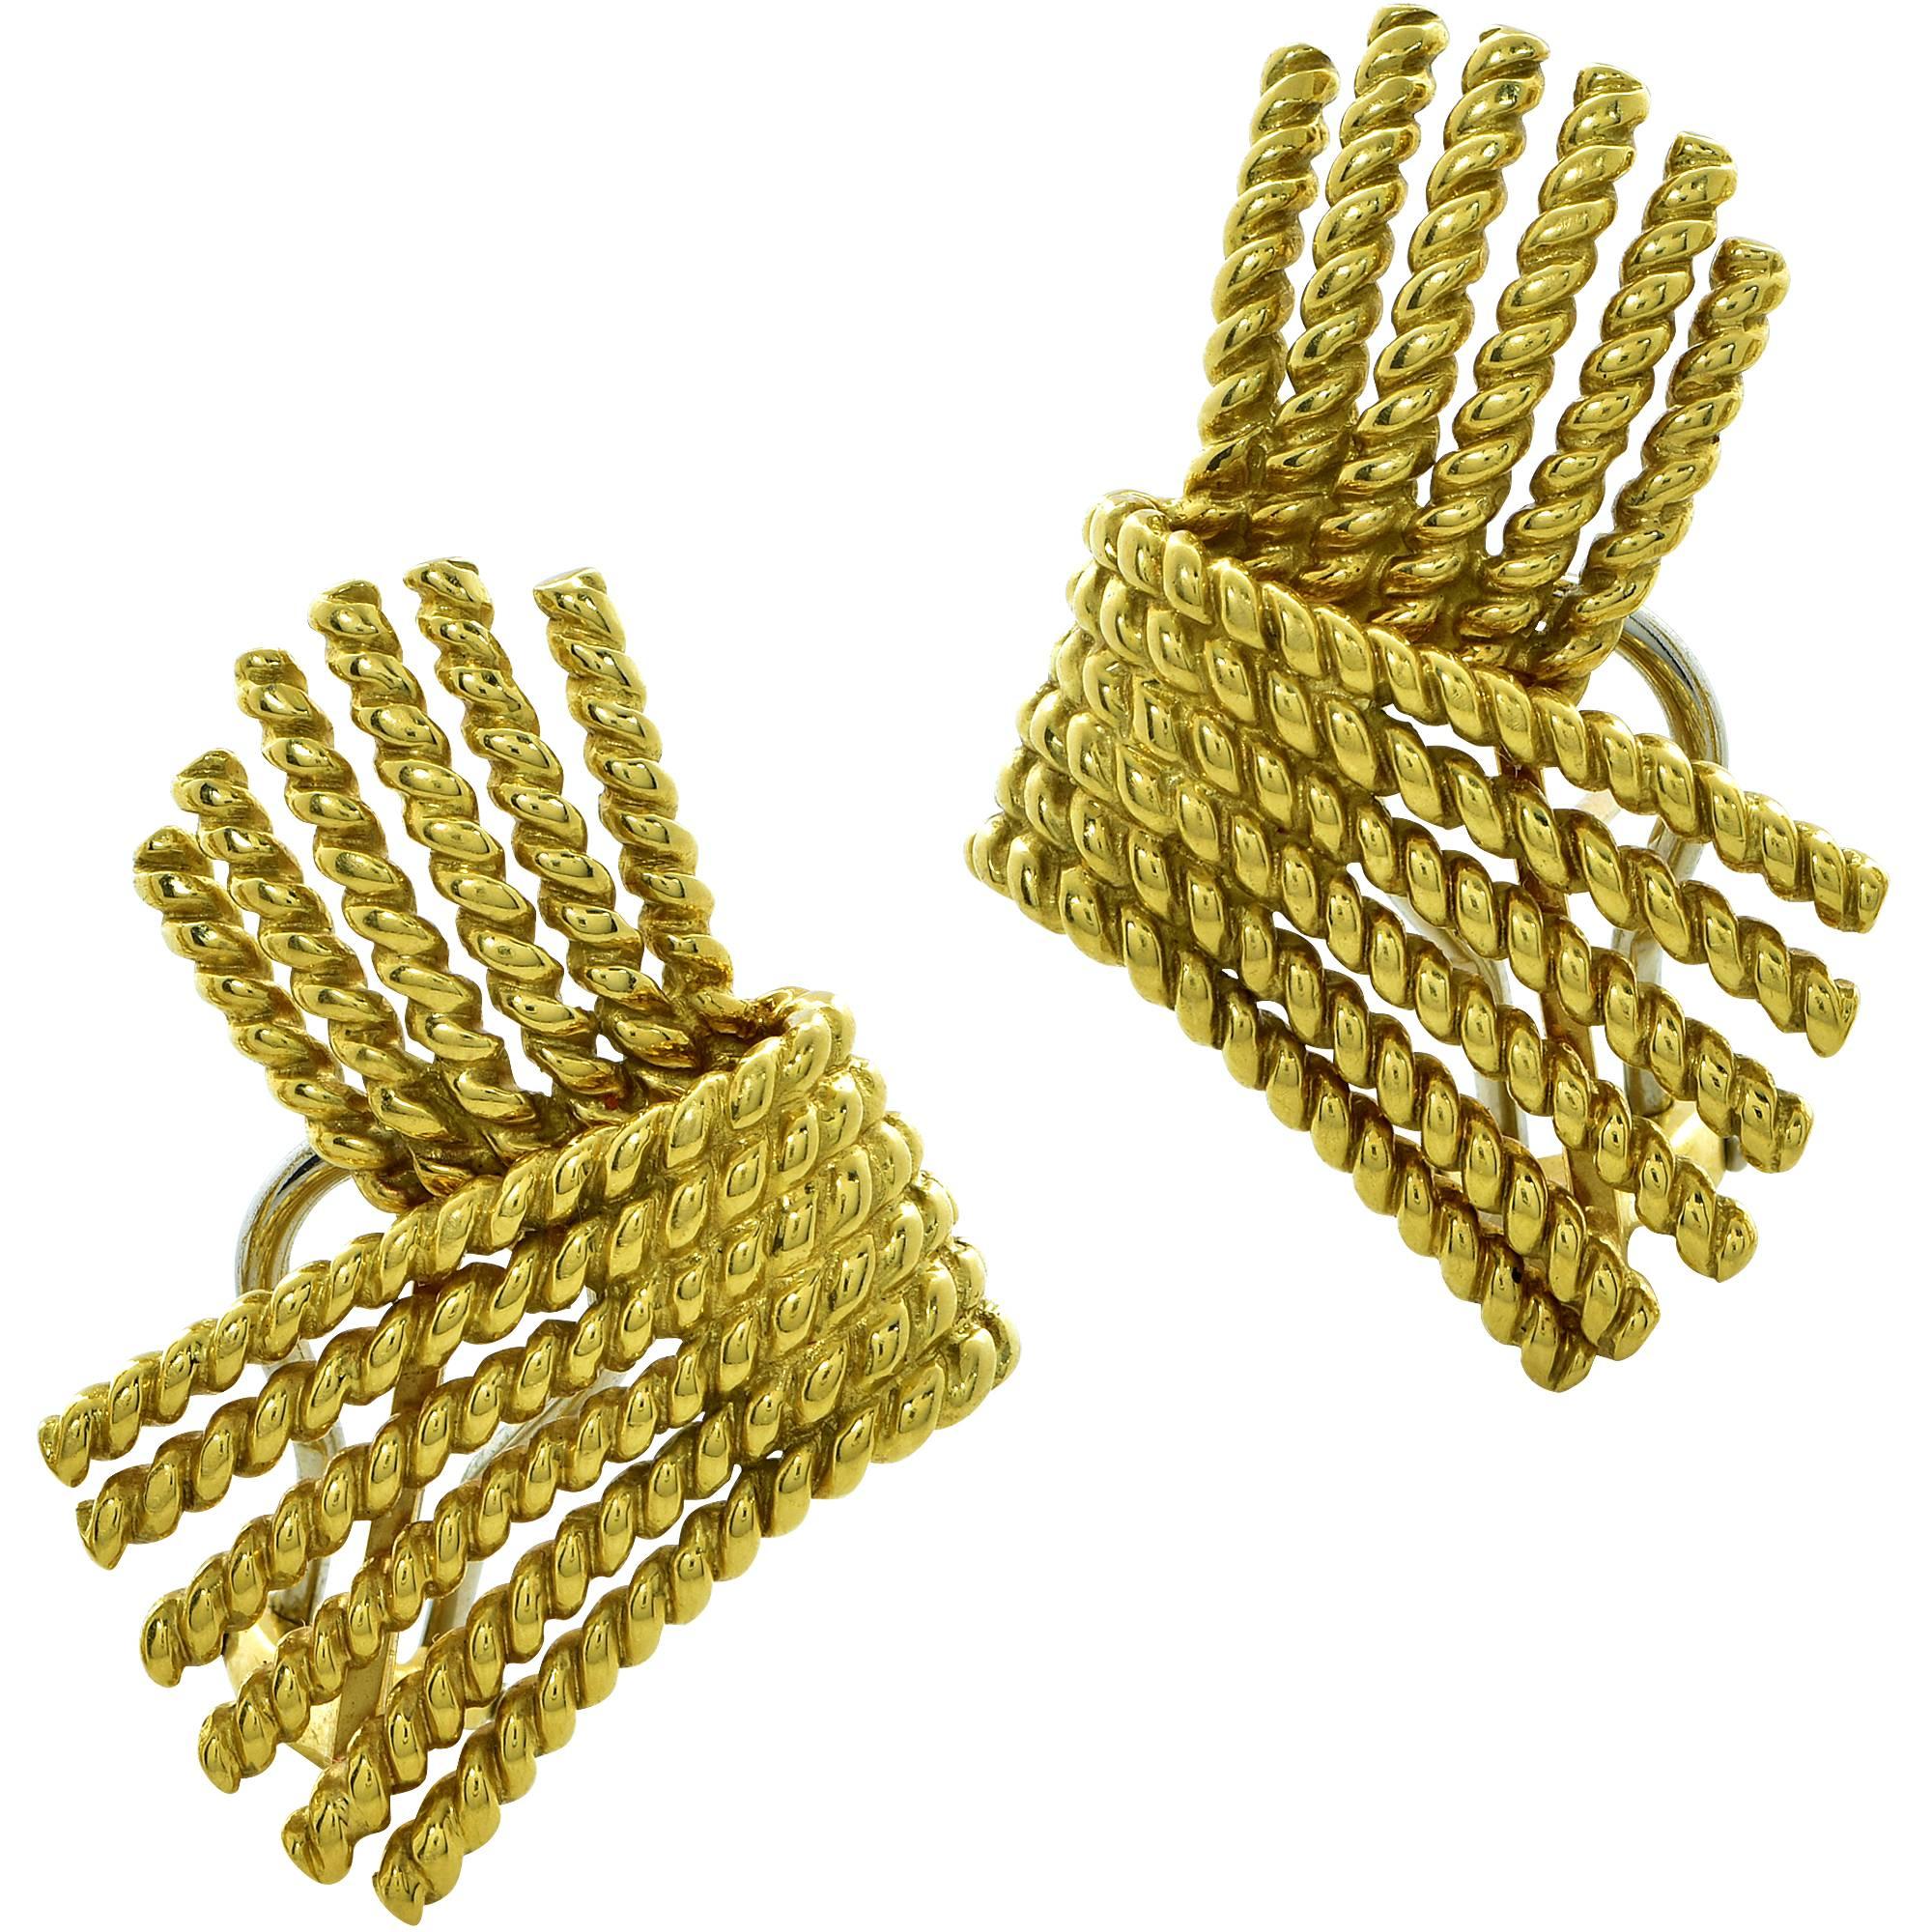 Tiffany & Co. Schlumberger V-Rope 18k yellow gold earrings featuring handcrafted wires of gold twisted together to form a rope design. These earrings measure 29.8mm x 21mm and weigh 16.64 grams. Since 1956 Jean Schlumberger has collaborated with